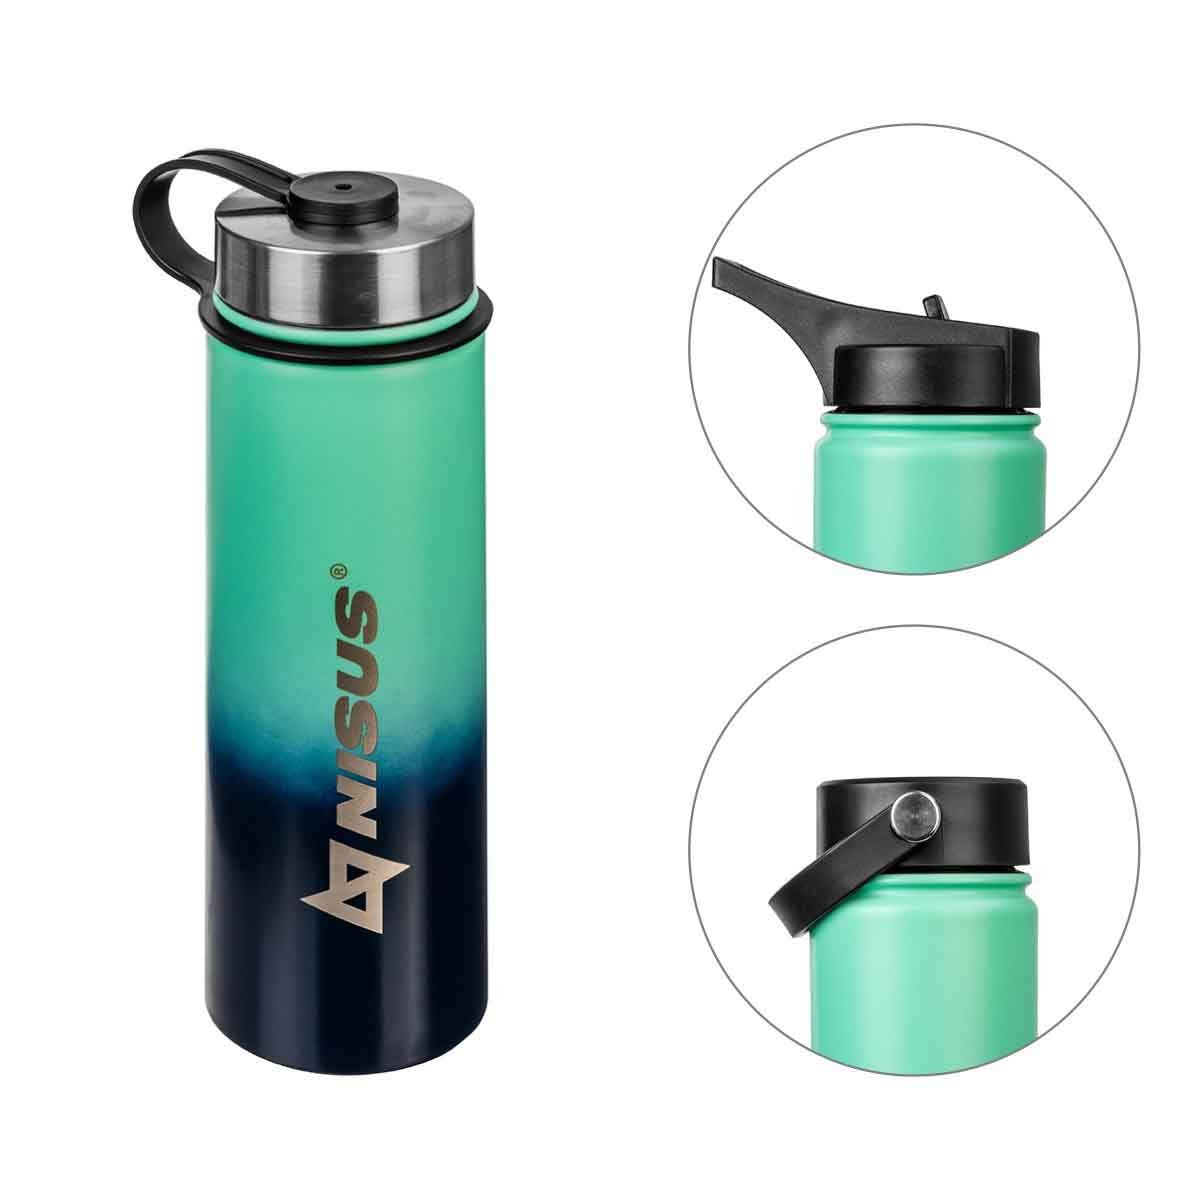 Stainless Steel Insulated Sport Water Bottle is featuring three lid types